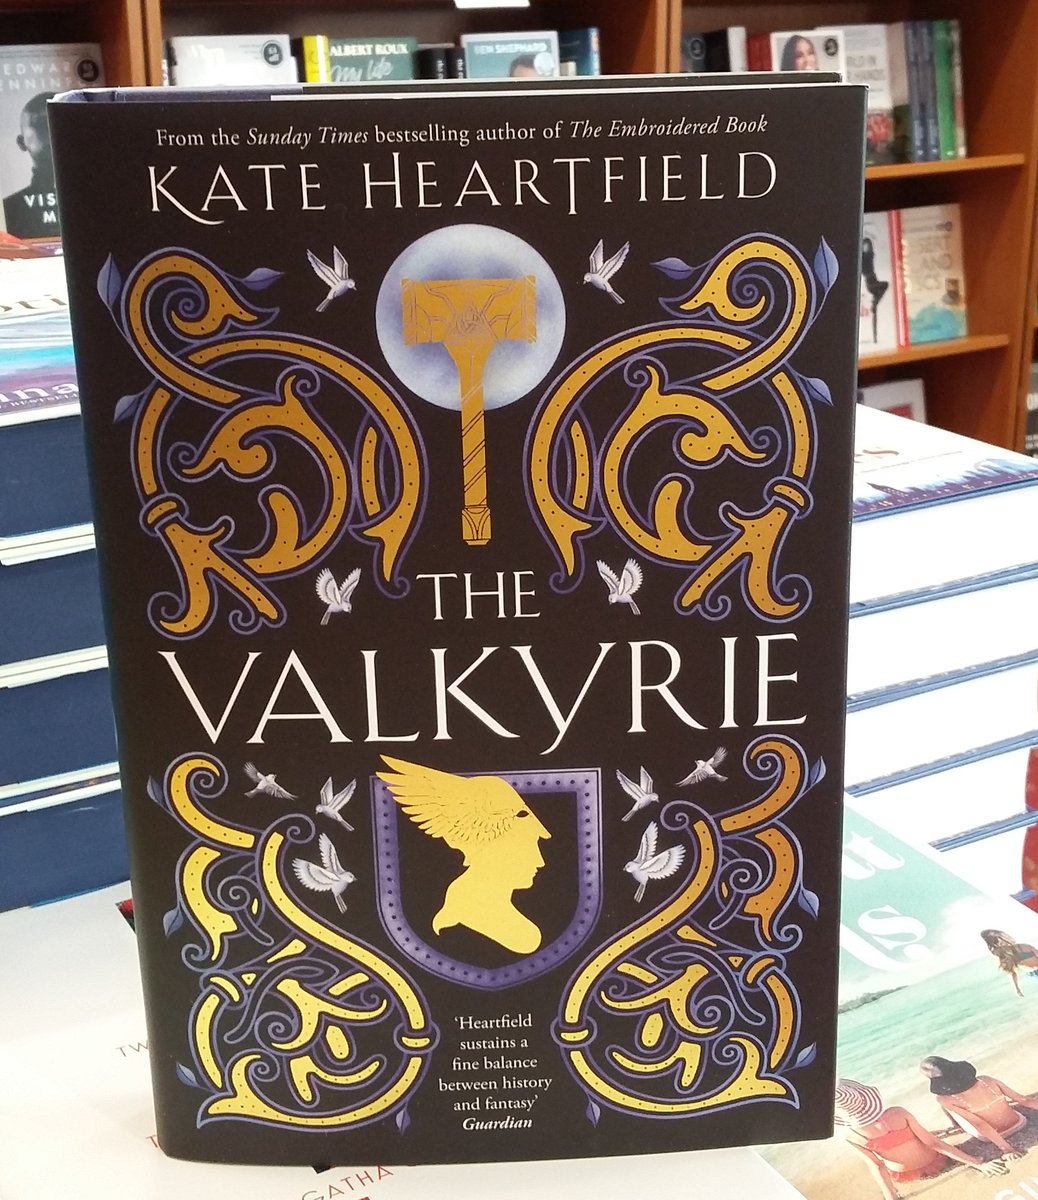 Still in the mood for something mythic but fancy a change from the Greeks? What a nicely timed appearance for @kateheartfield's new Norse retelling then! Check out The Valkyrie when you pop in to see us.